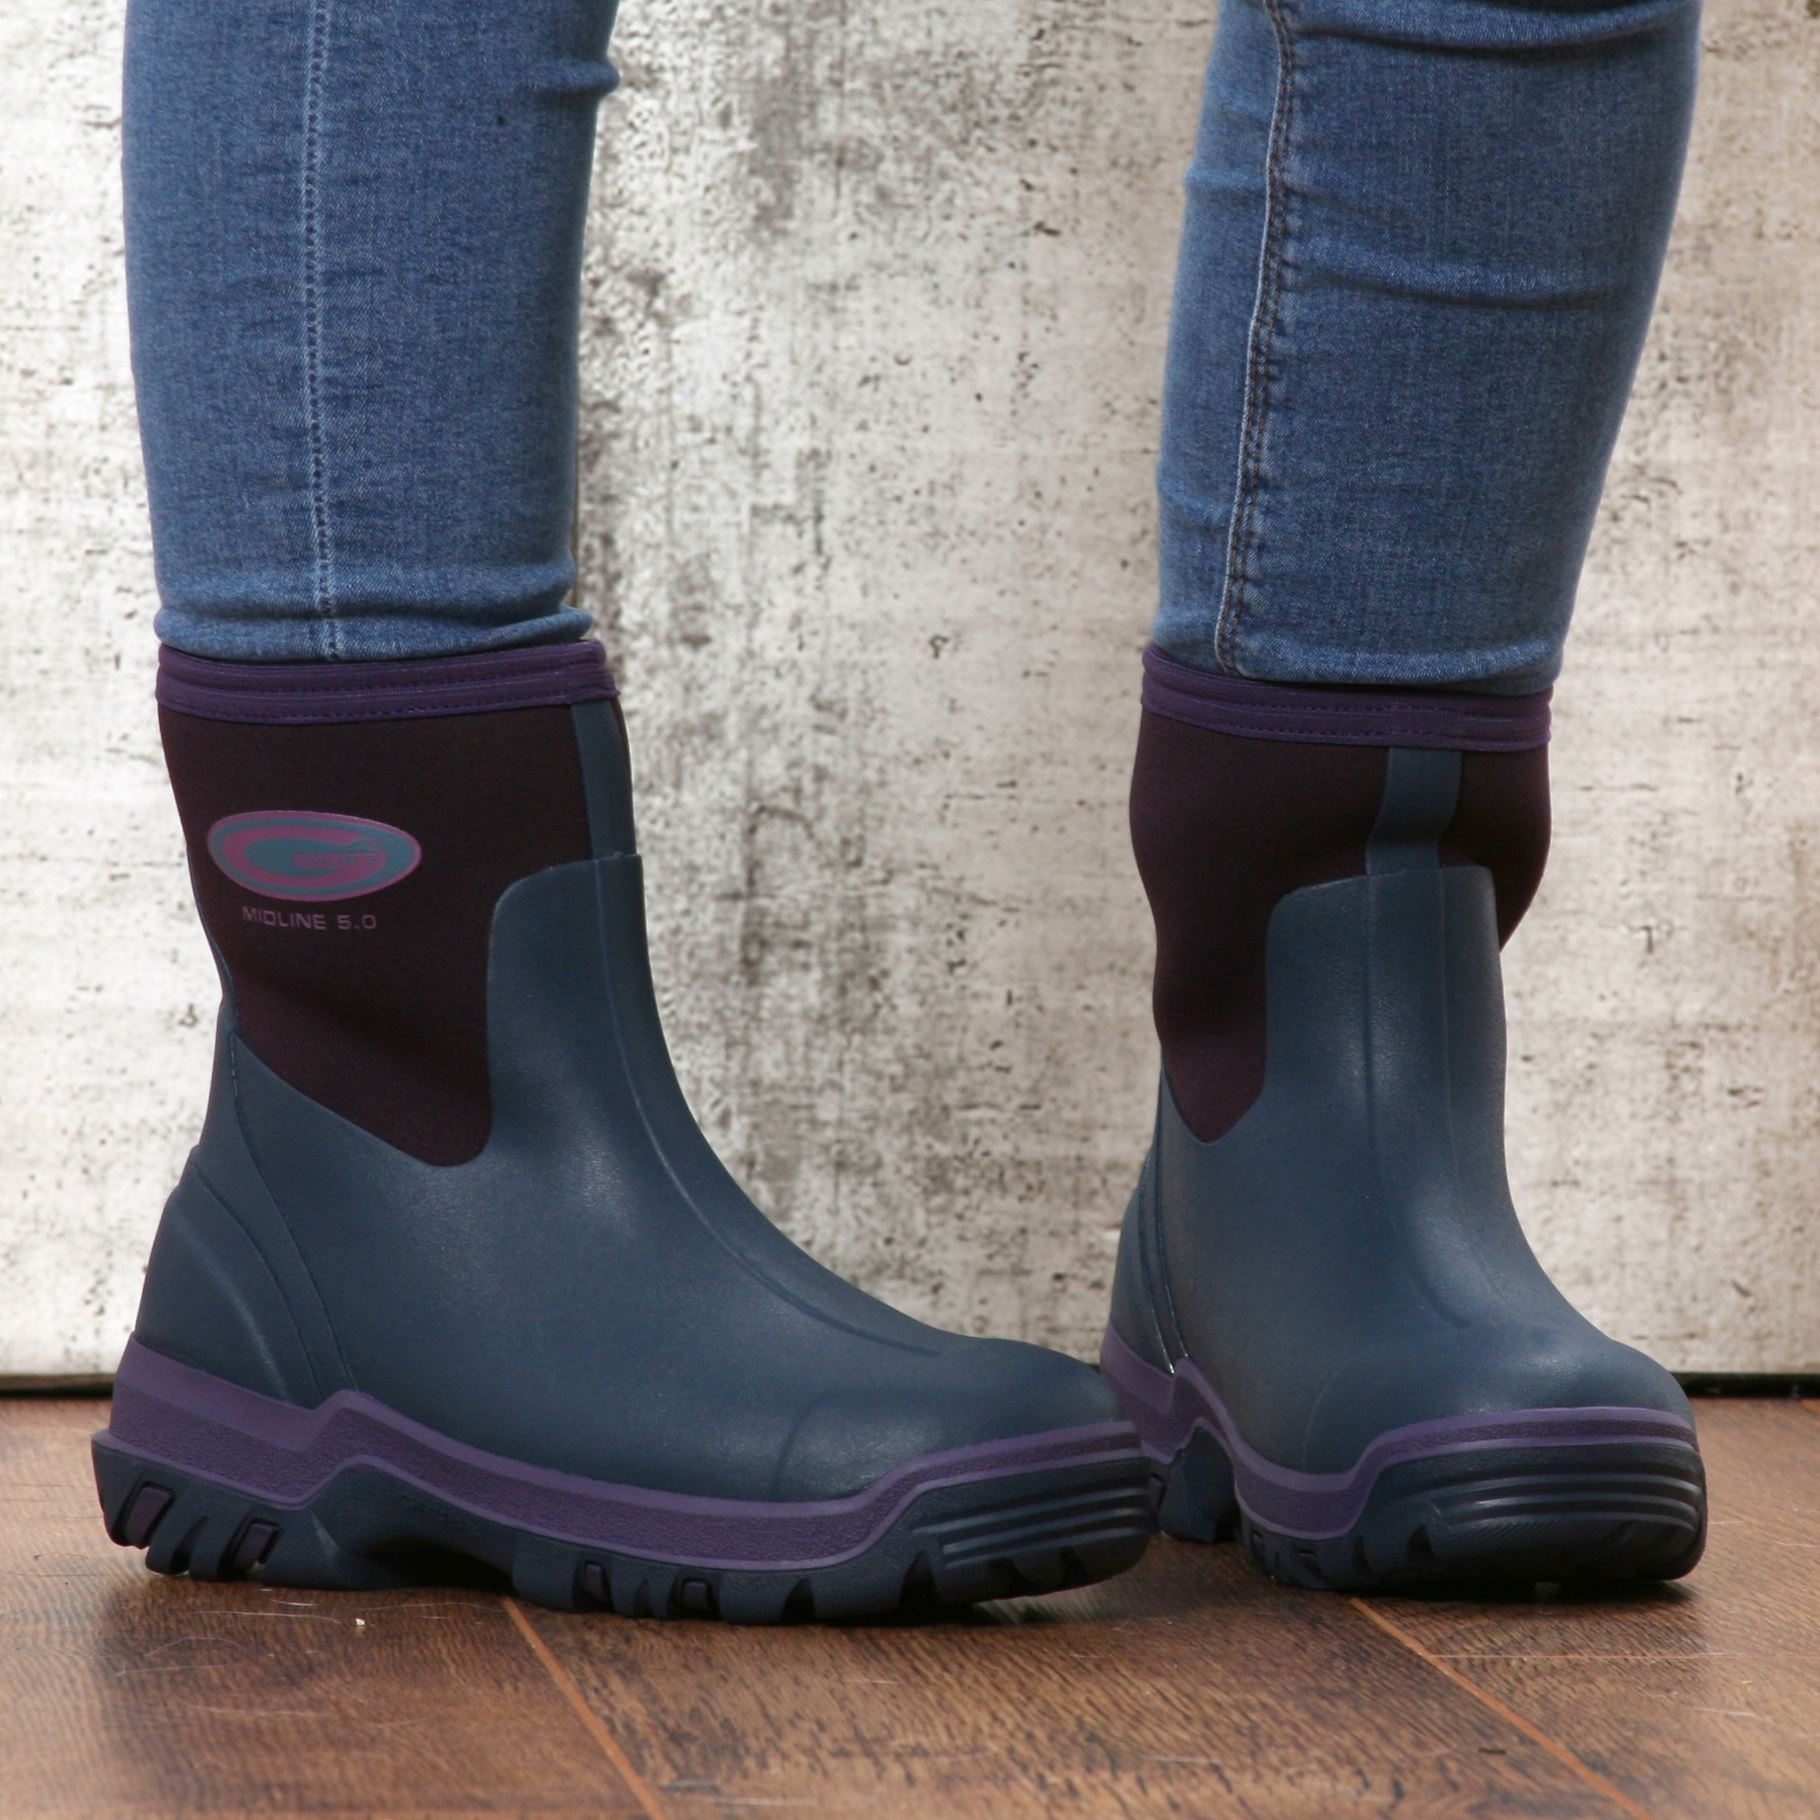 products-0000261_grubs-midline-50-wellington-boots-in-violet_1